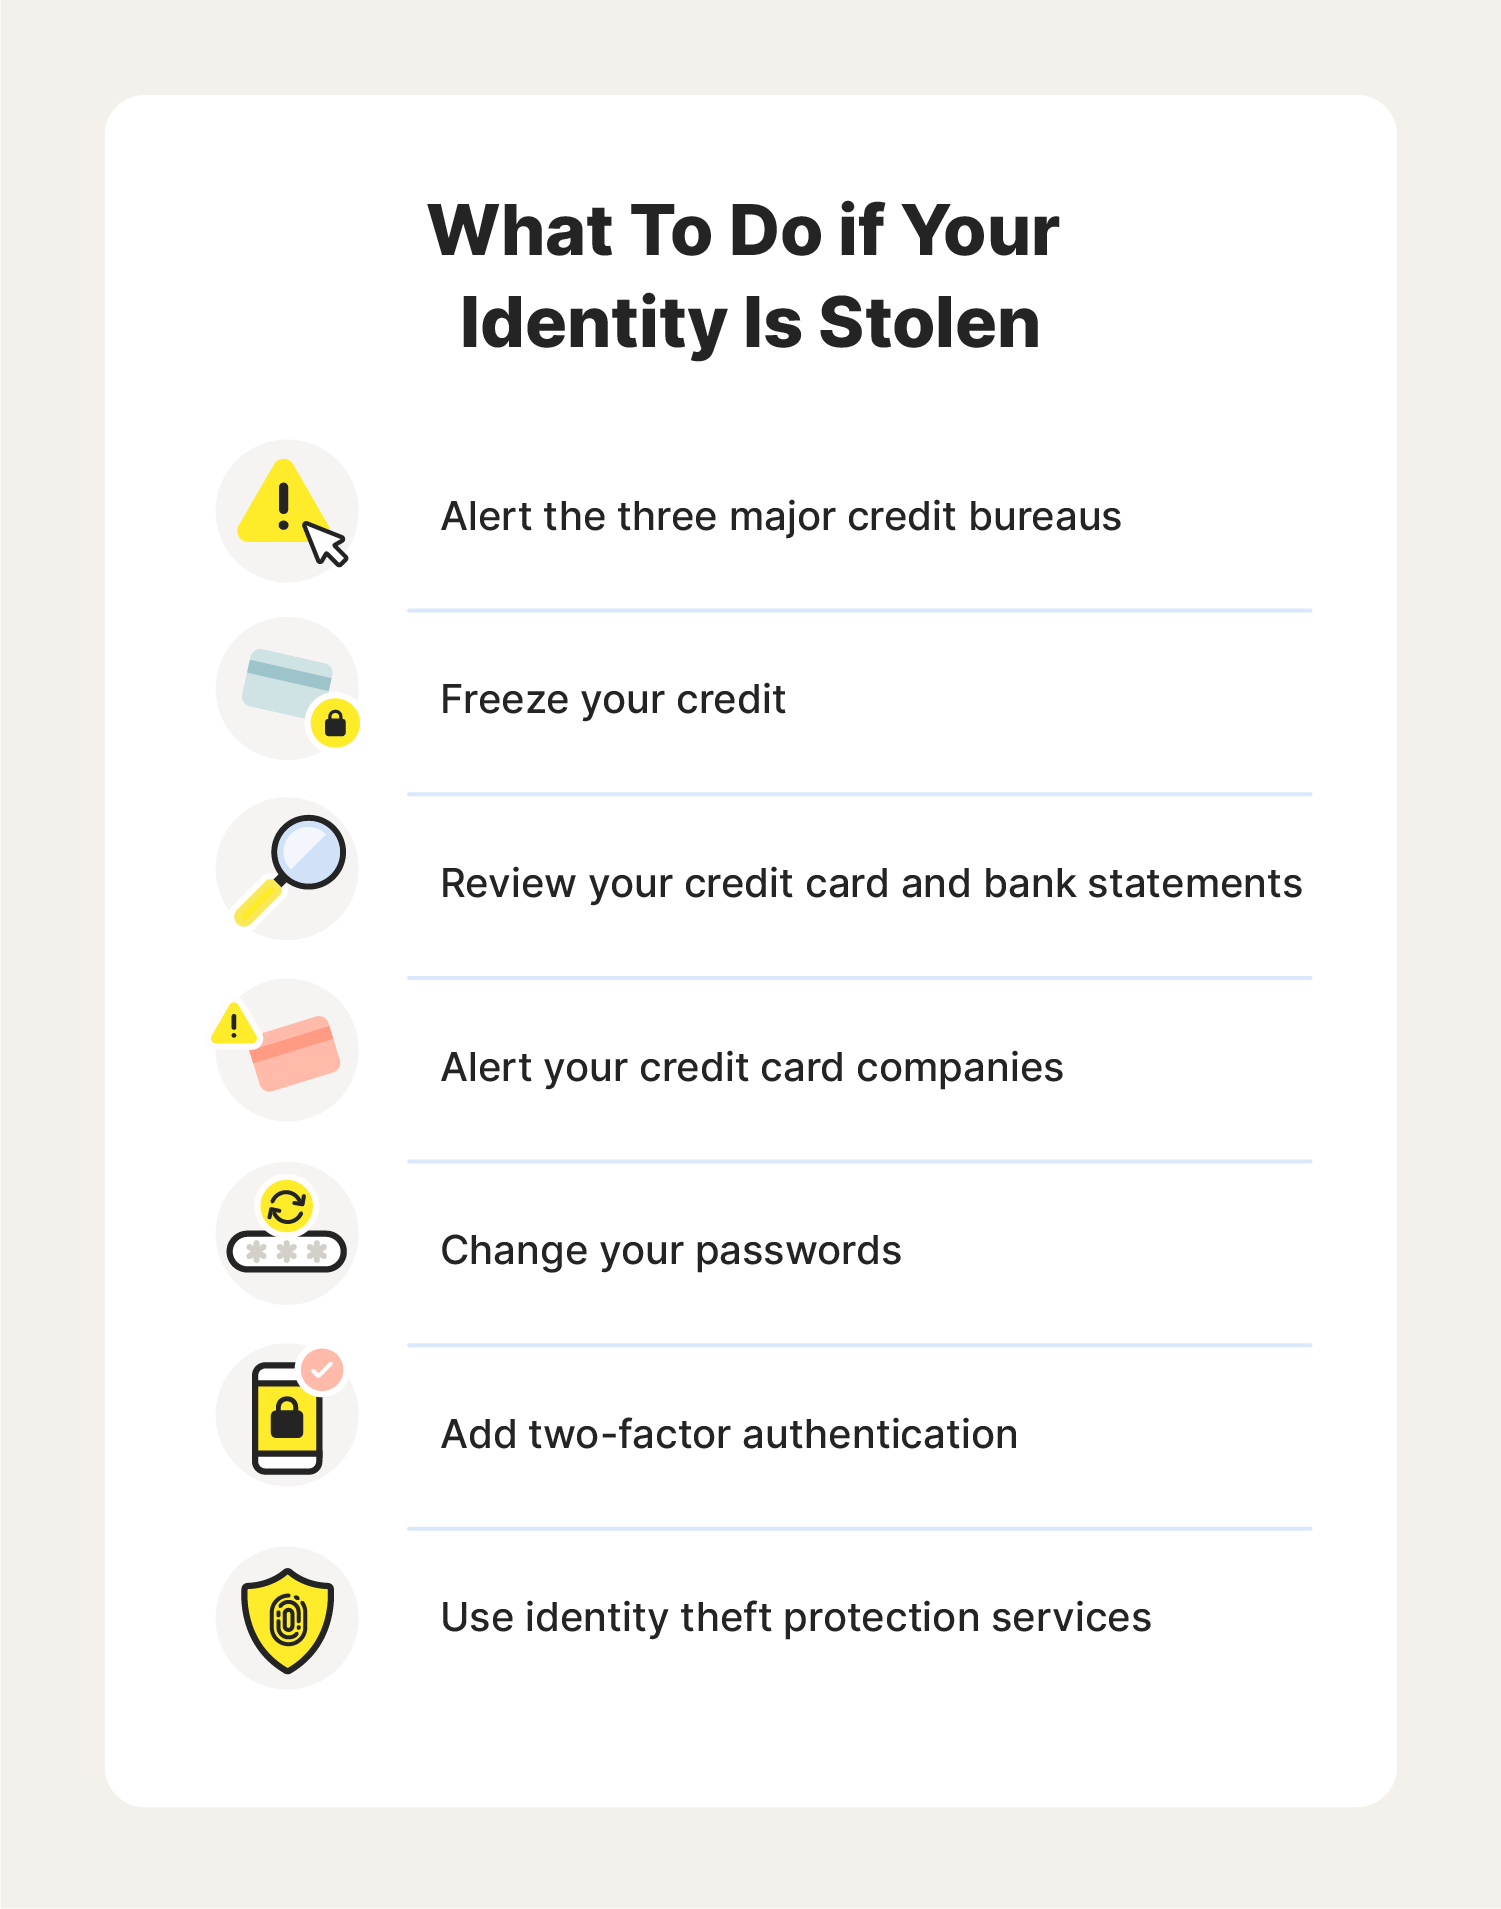 A graphic details what you should do if your identity is stolen, a crucial step after learning how to report identity theft.